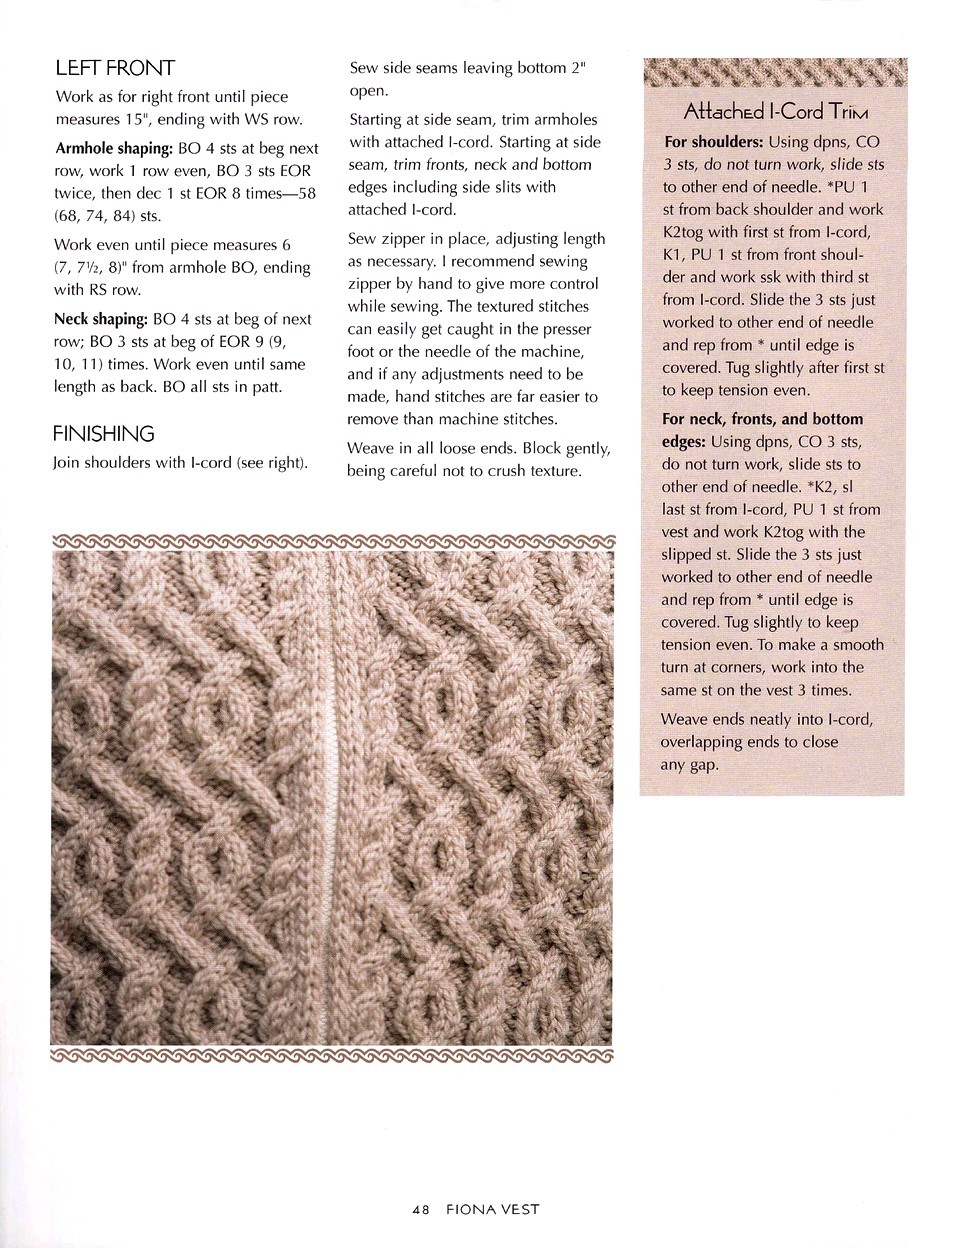 Cable Confidence. A Guide to Textured Knitting - 2008 48